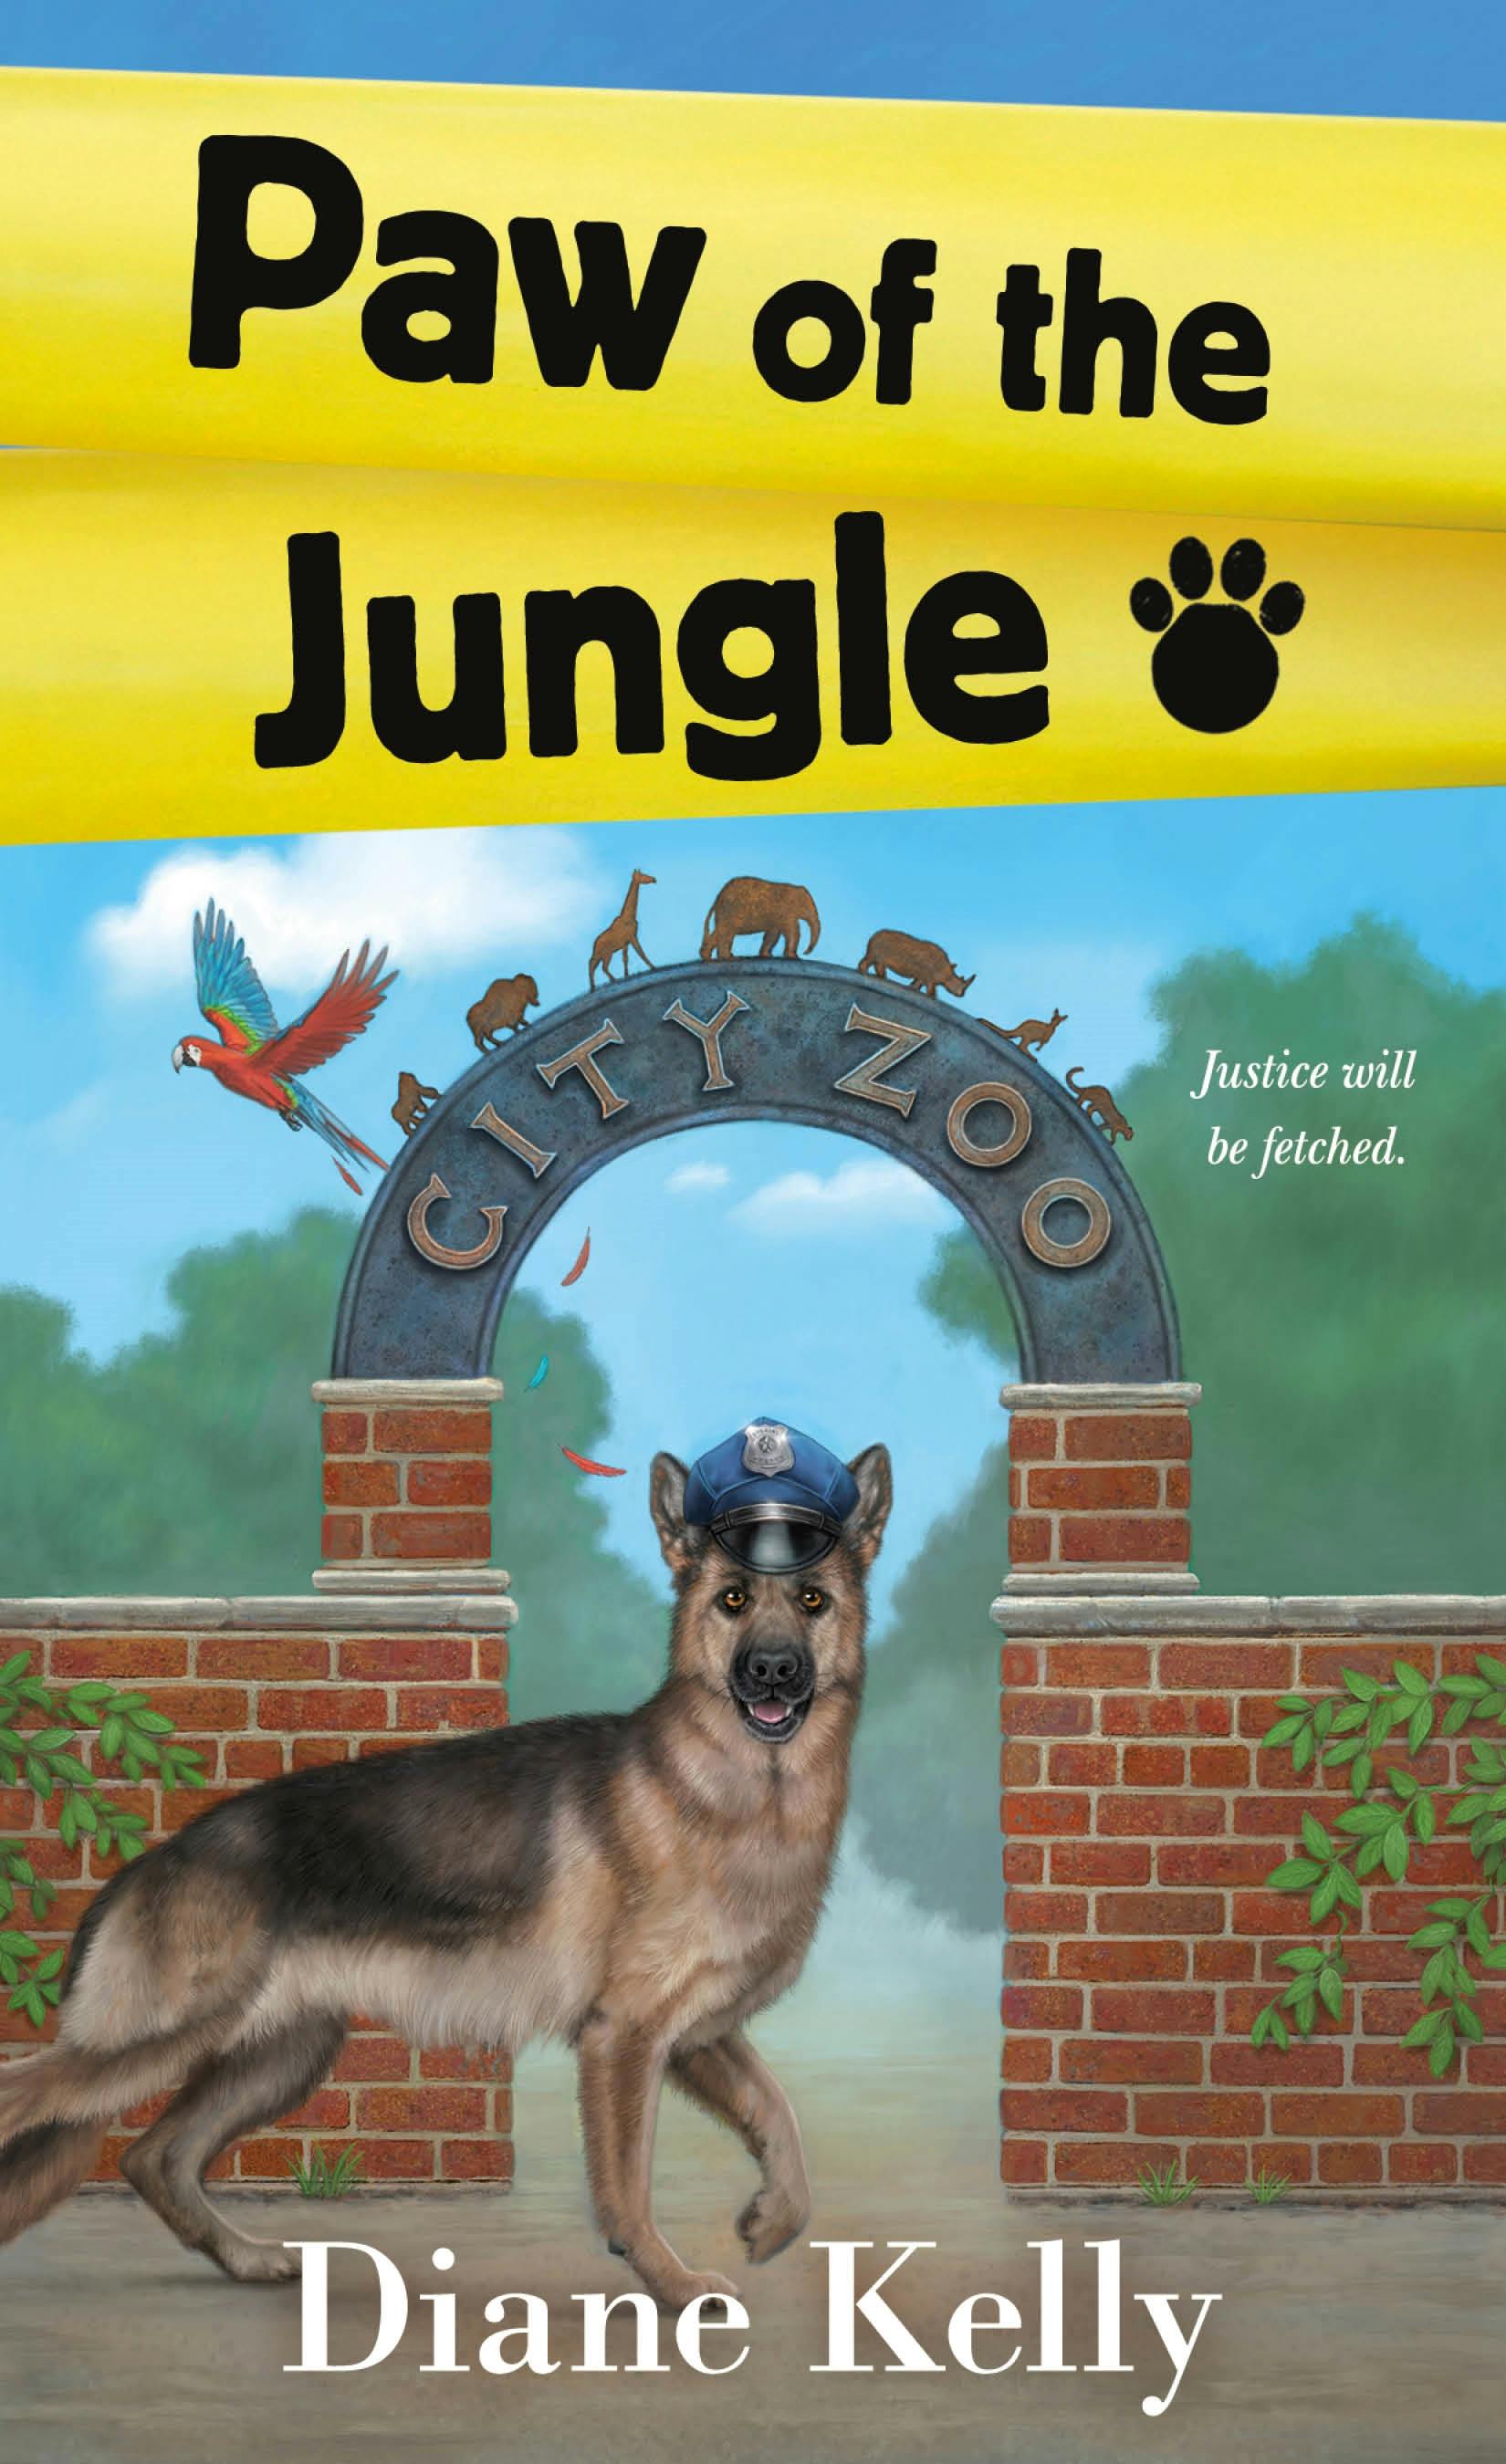 Image of Paw of the Jungle